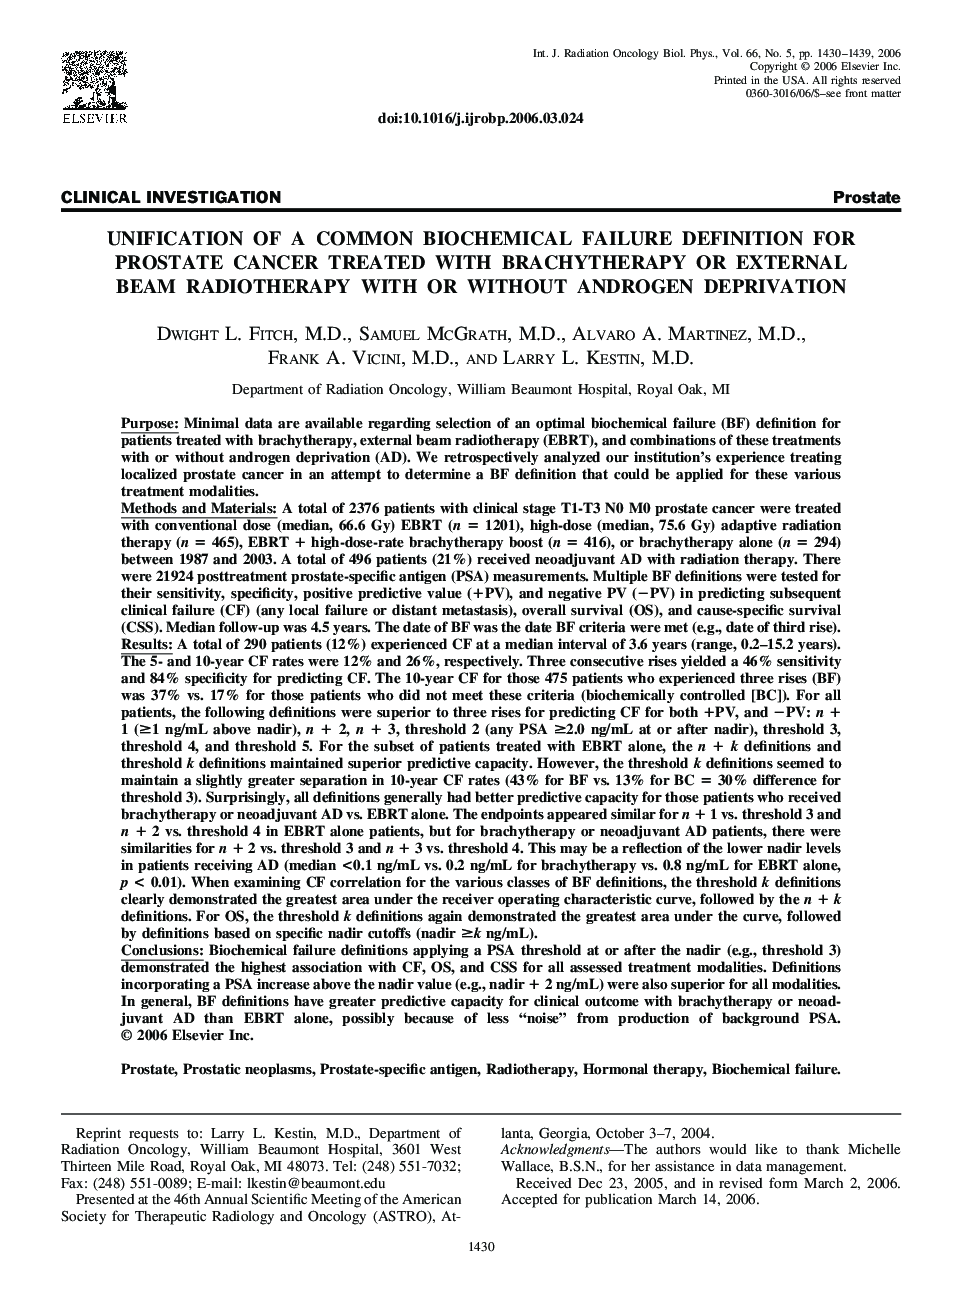 Unification of a common biochemical failure definition for prostate cancer treated with brachytherapy or external beam radiotherapy with or without androgen deprivation